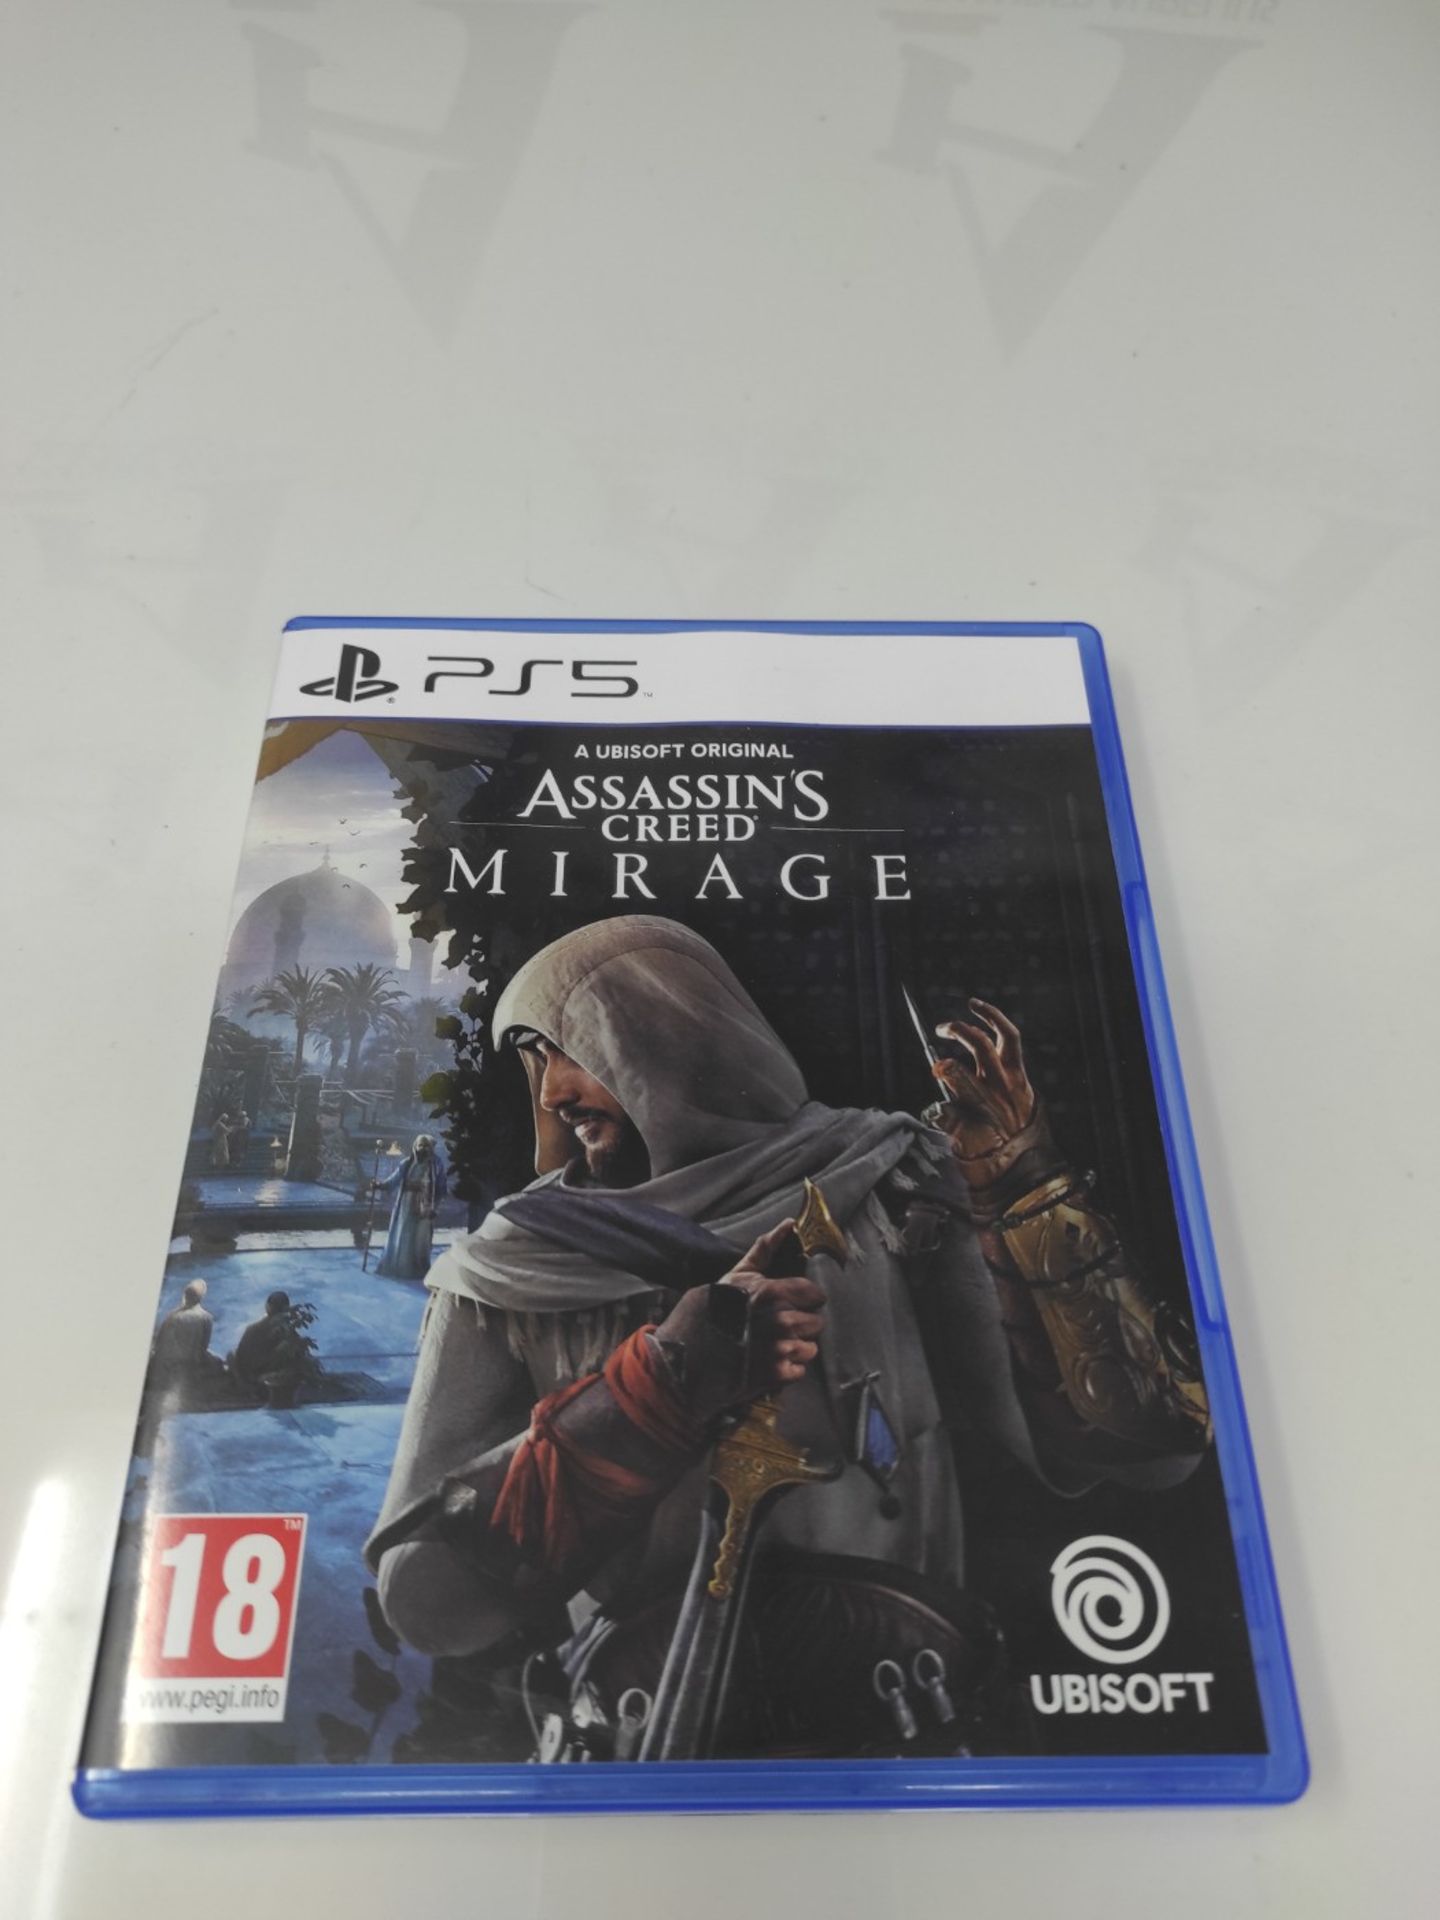 ASSASSIN'S CREED MIRAGE PS5 - Image 2 of 3